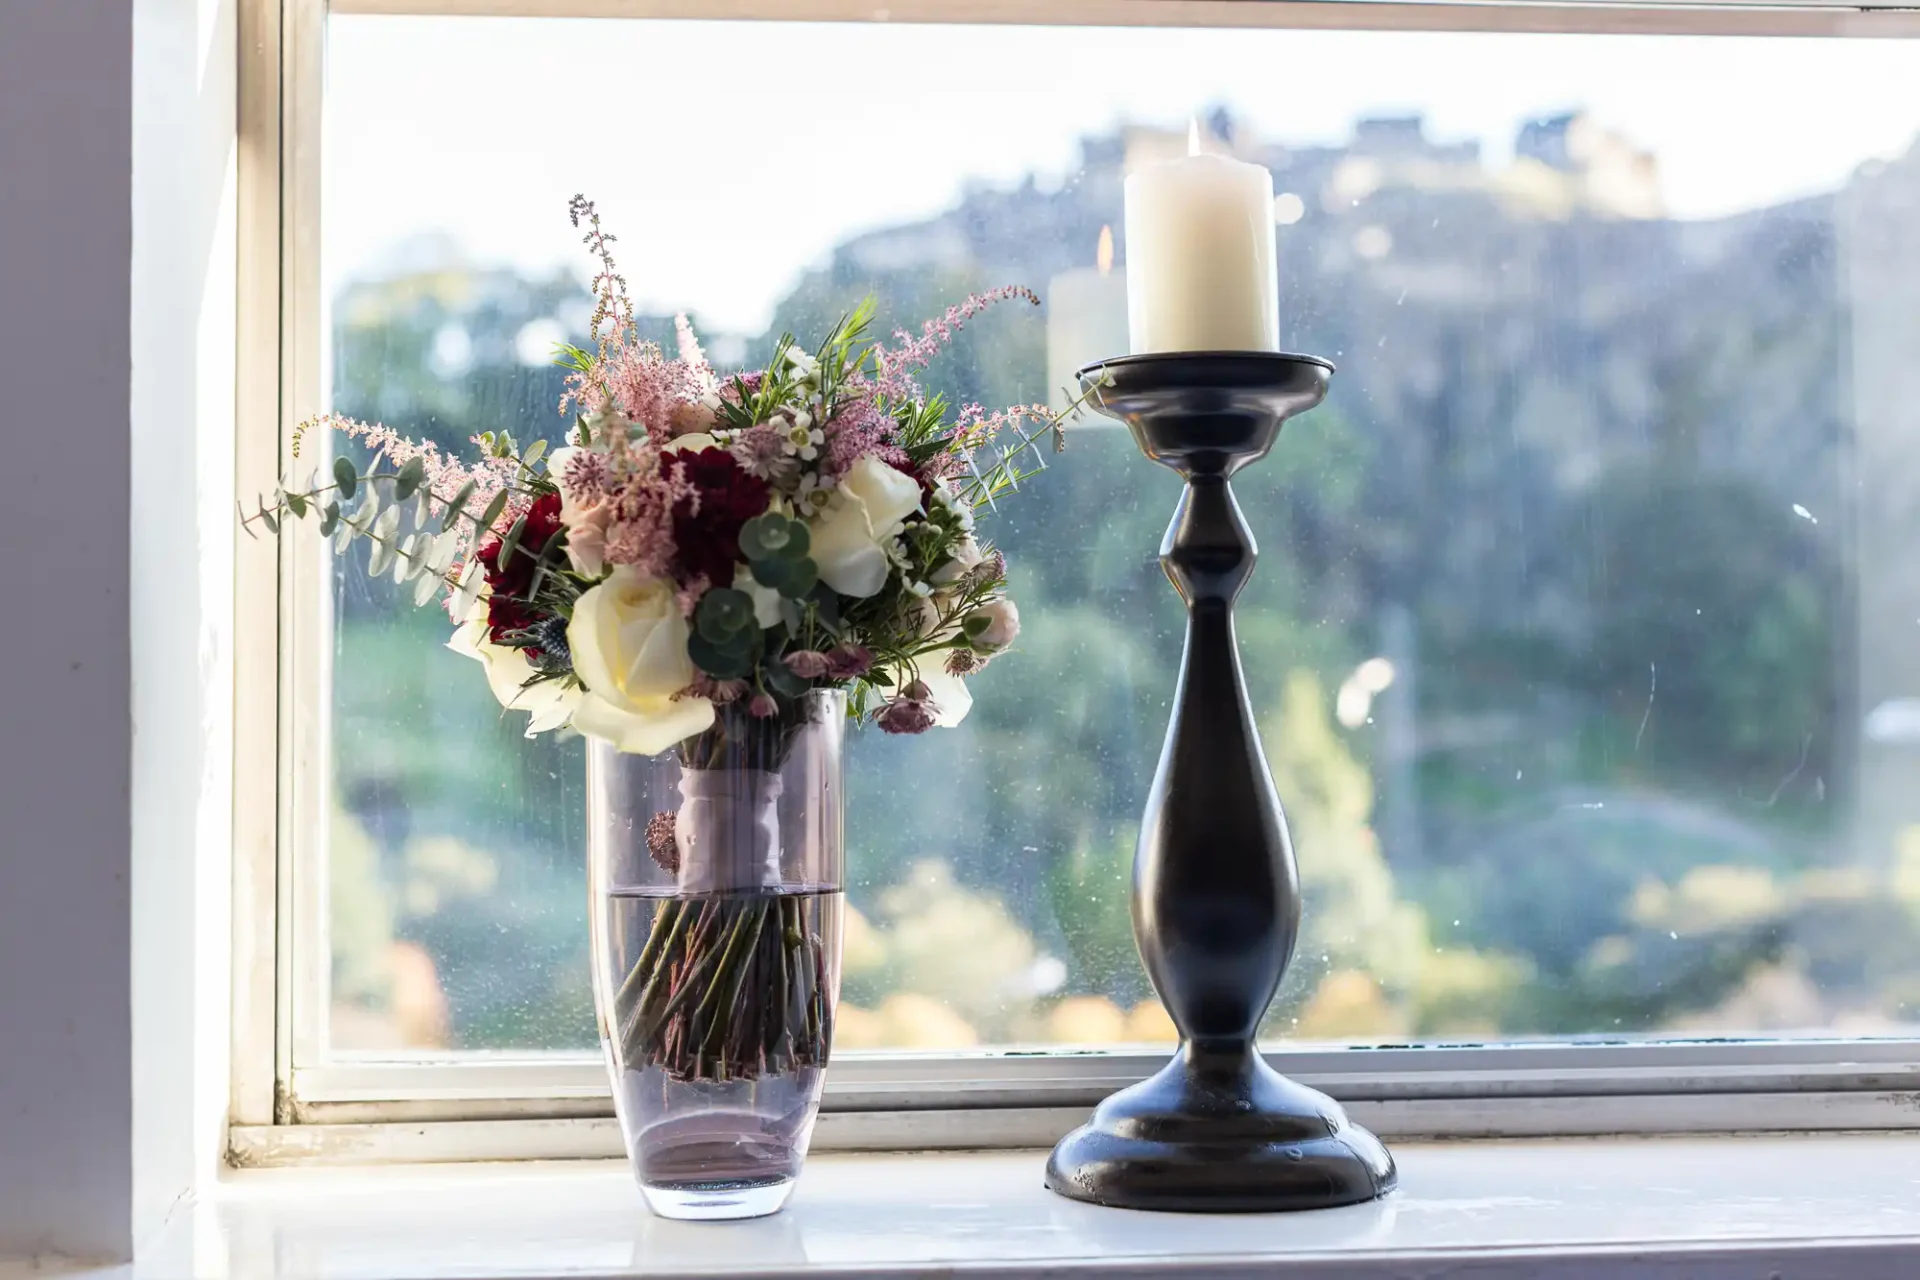 A bouquet of flowers and a lit candle on a tall black holder, placed on a windowsill with views of trees outside.